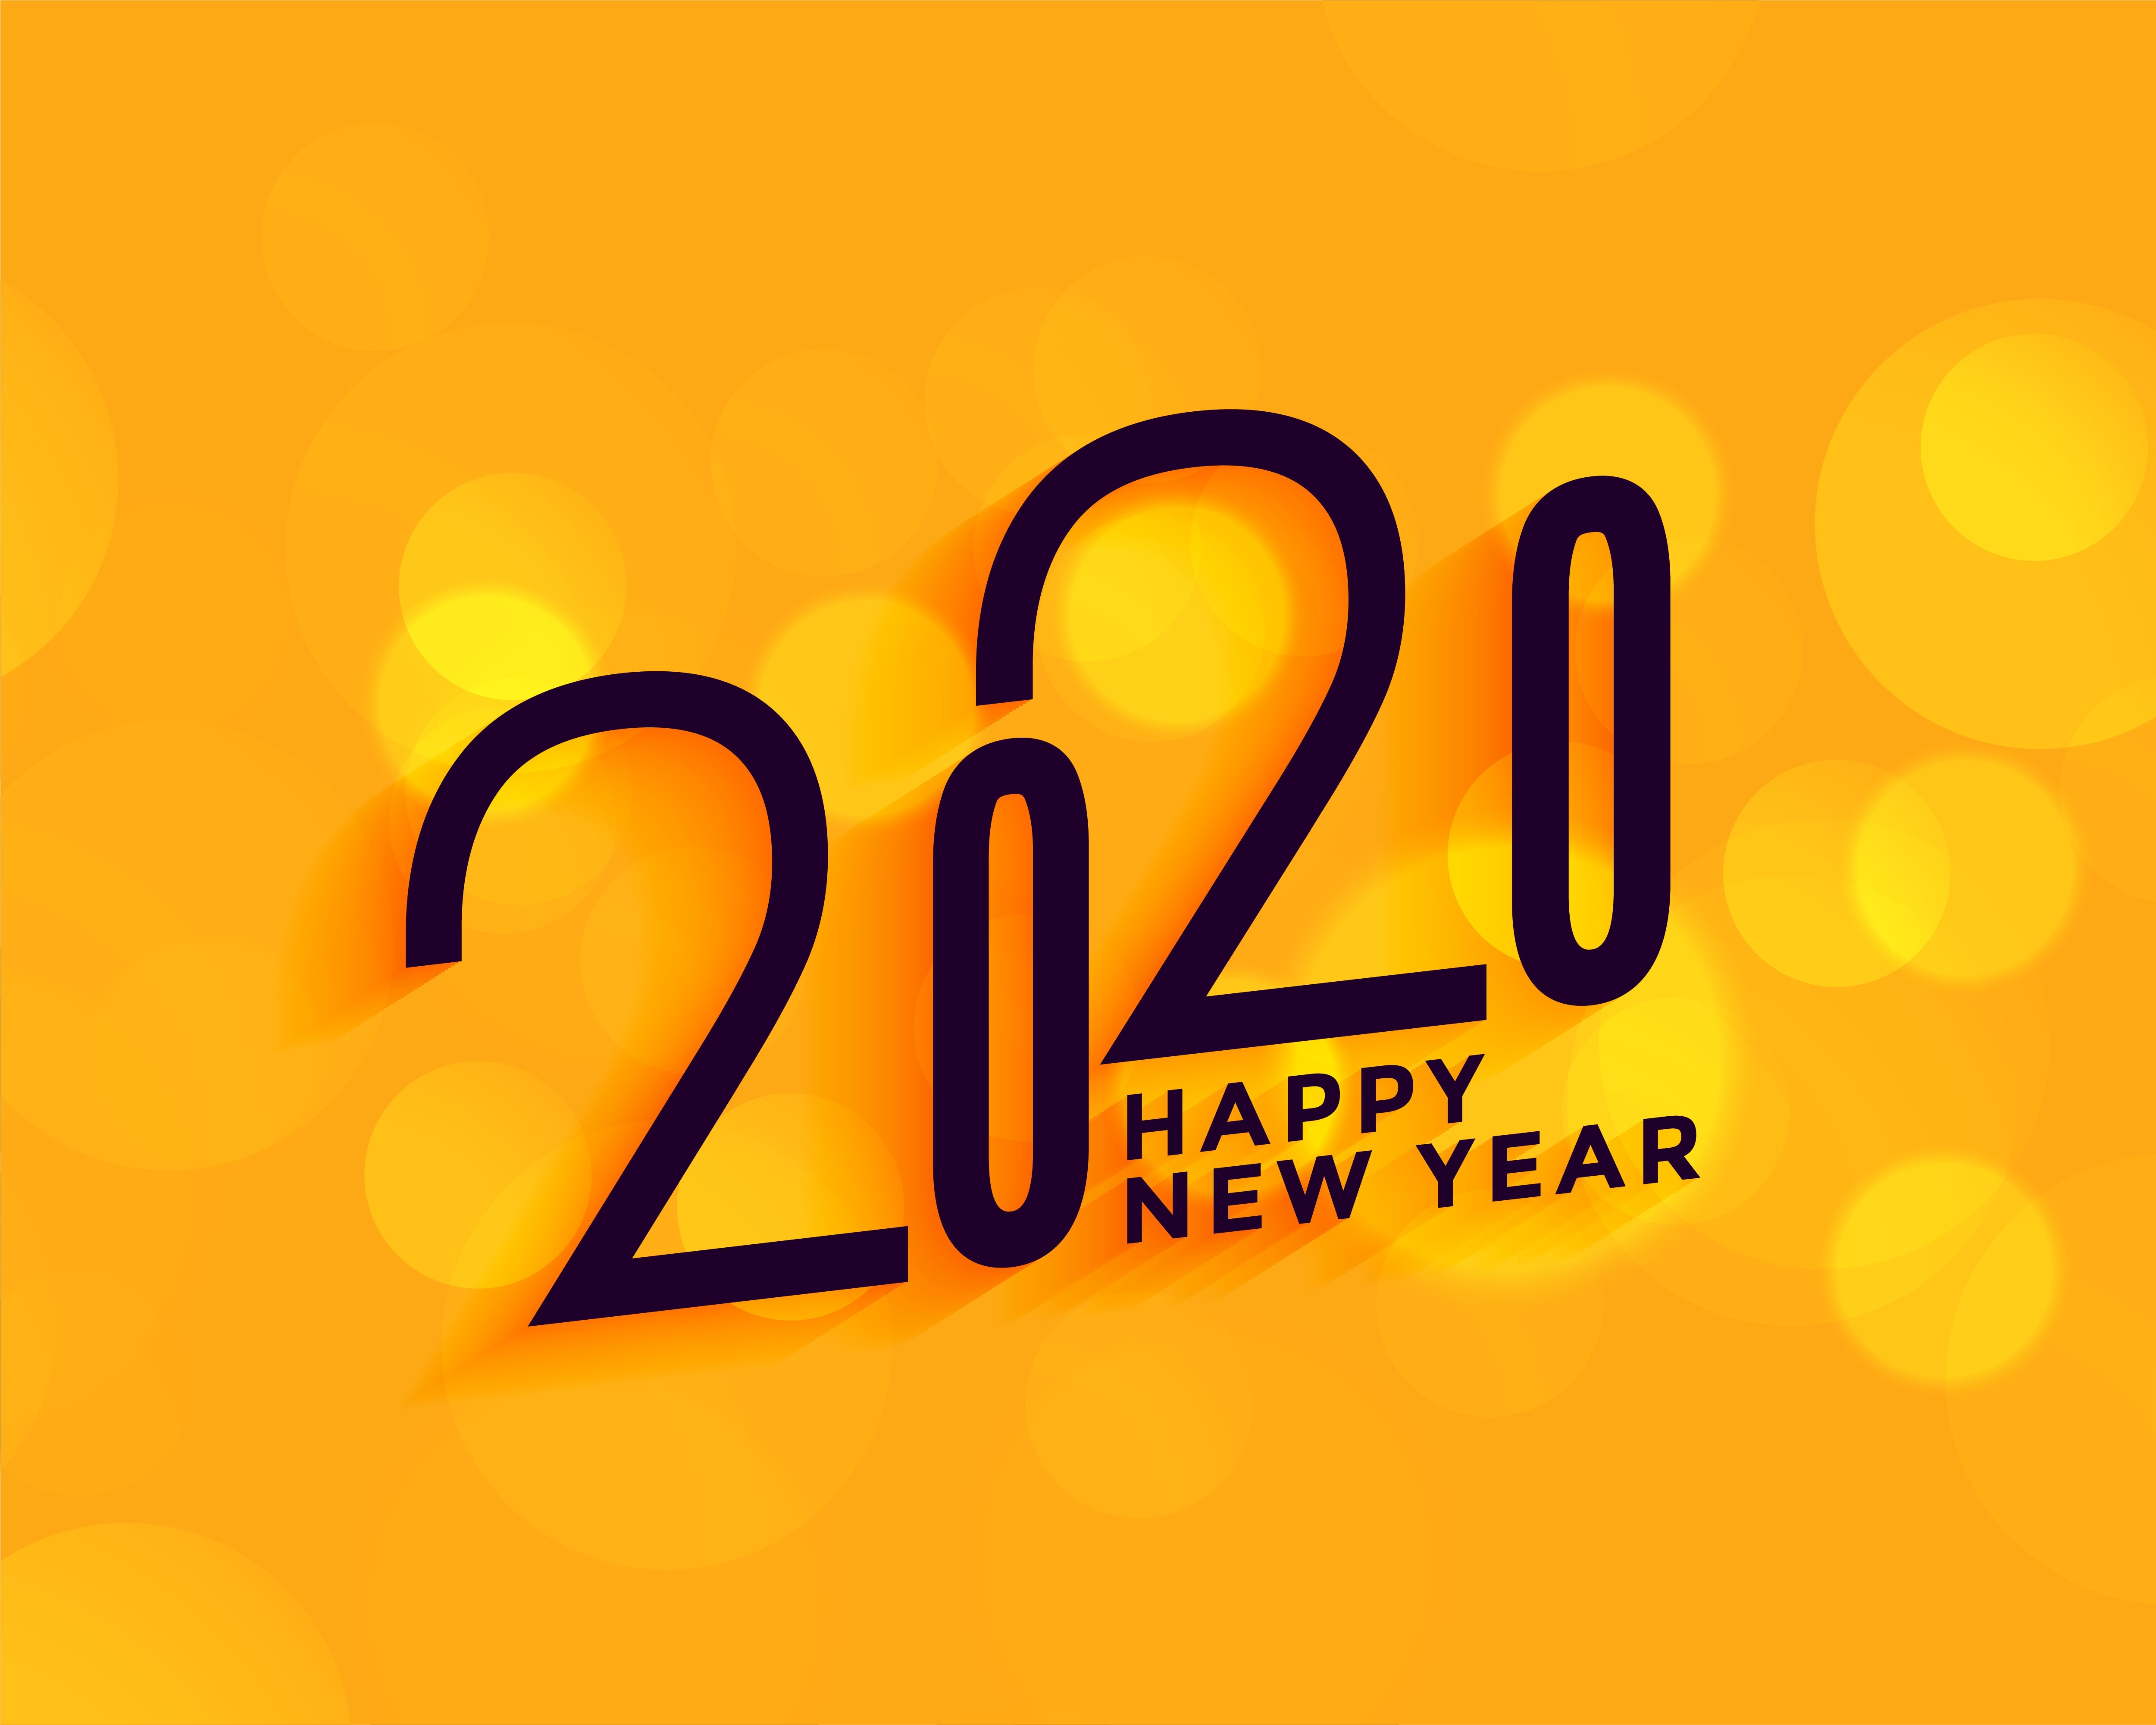 2020 New Year Wallpaper HD Holidays 4K Wallpapers Images Photos